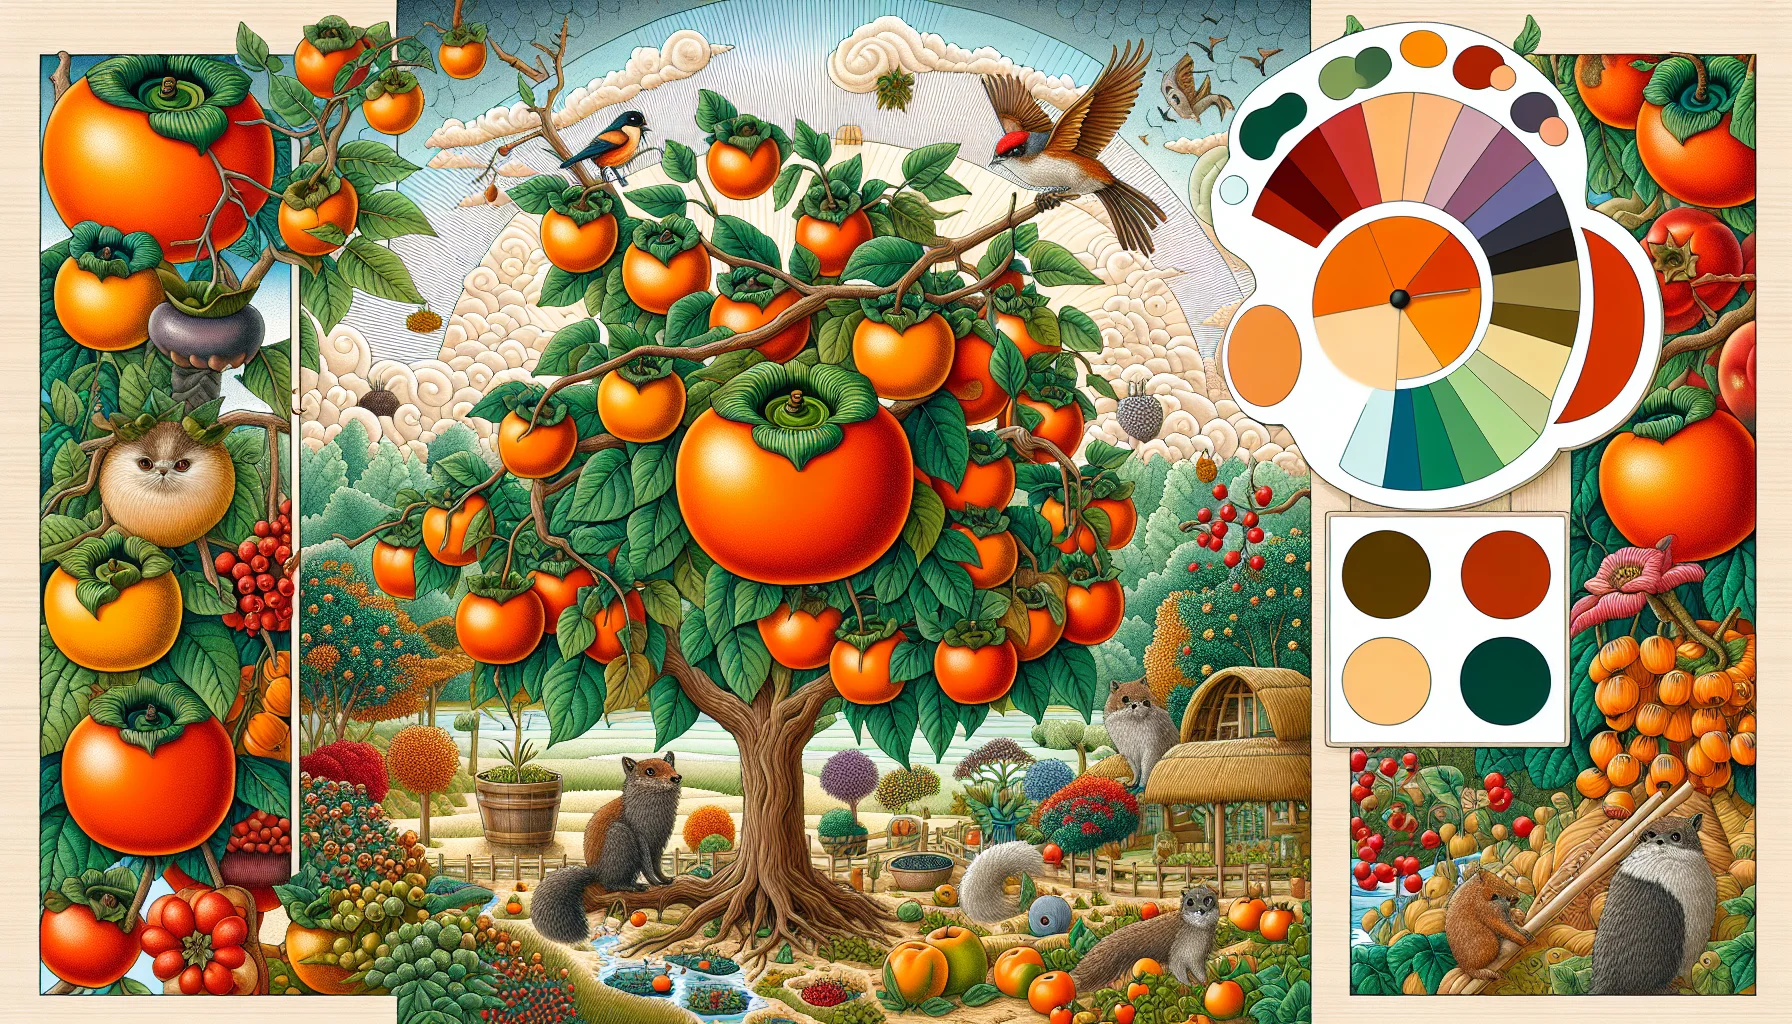 Create an intricately detailed yet humorous scenario depicting the ripening of a persimmon. The artwork should explore the world of gardening in a manner that evokes delight and interest. In the center of the picture, display a vividly colored persimmon ripening on a tree. Accompany this fruit tree with various jovial garden animals - perhaps a chuckling squirrel or a bird with a broad smile - as if they are eagerly waiting for the fruit to reach its peak of ripeness. Use complementing colors to make the scene vivid and enticing.